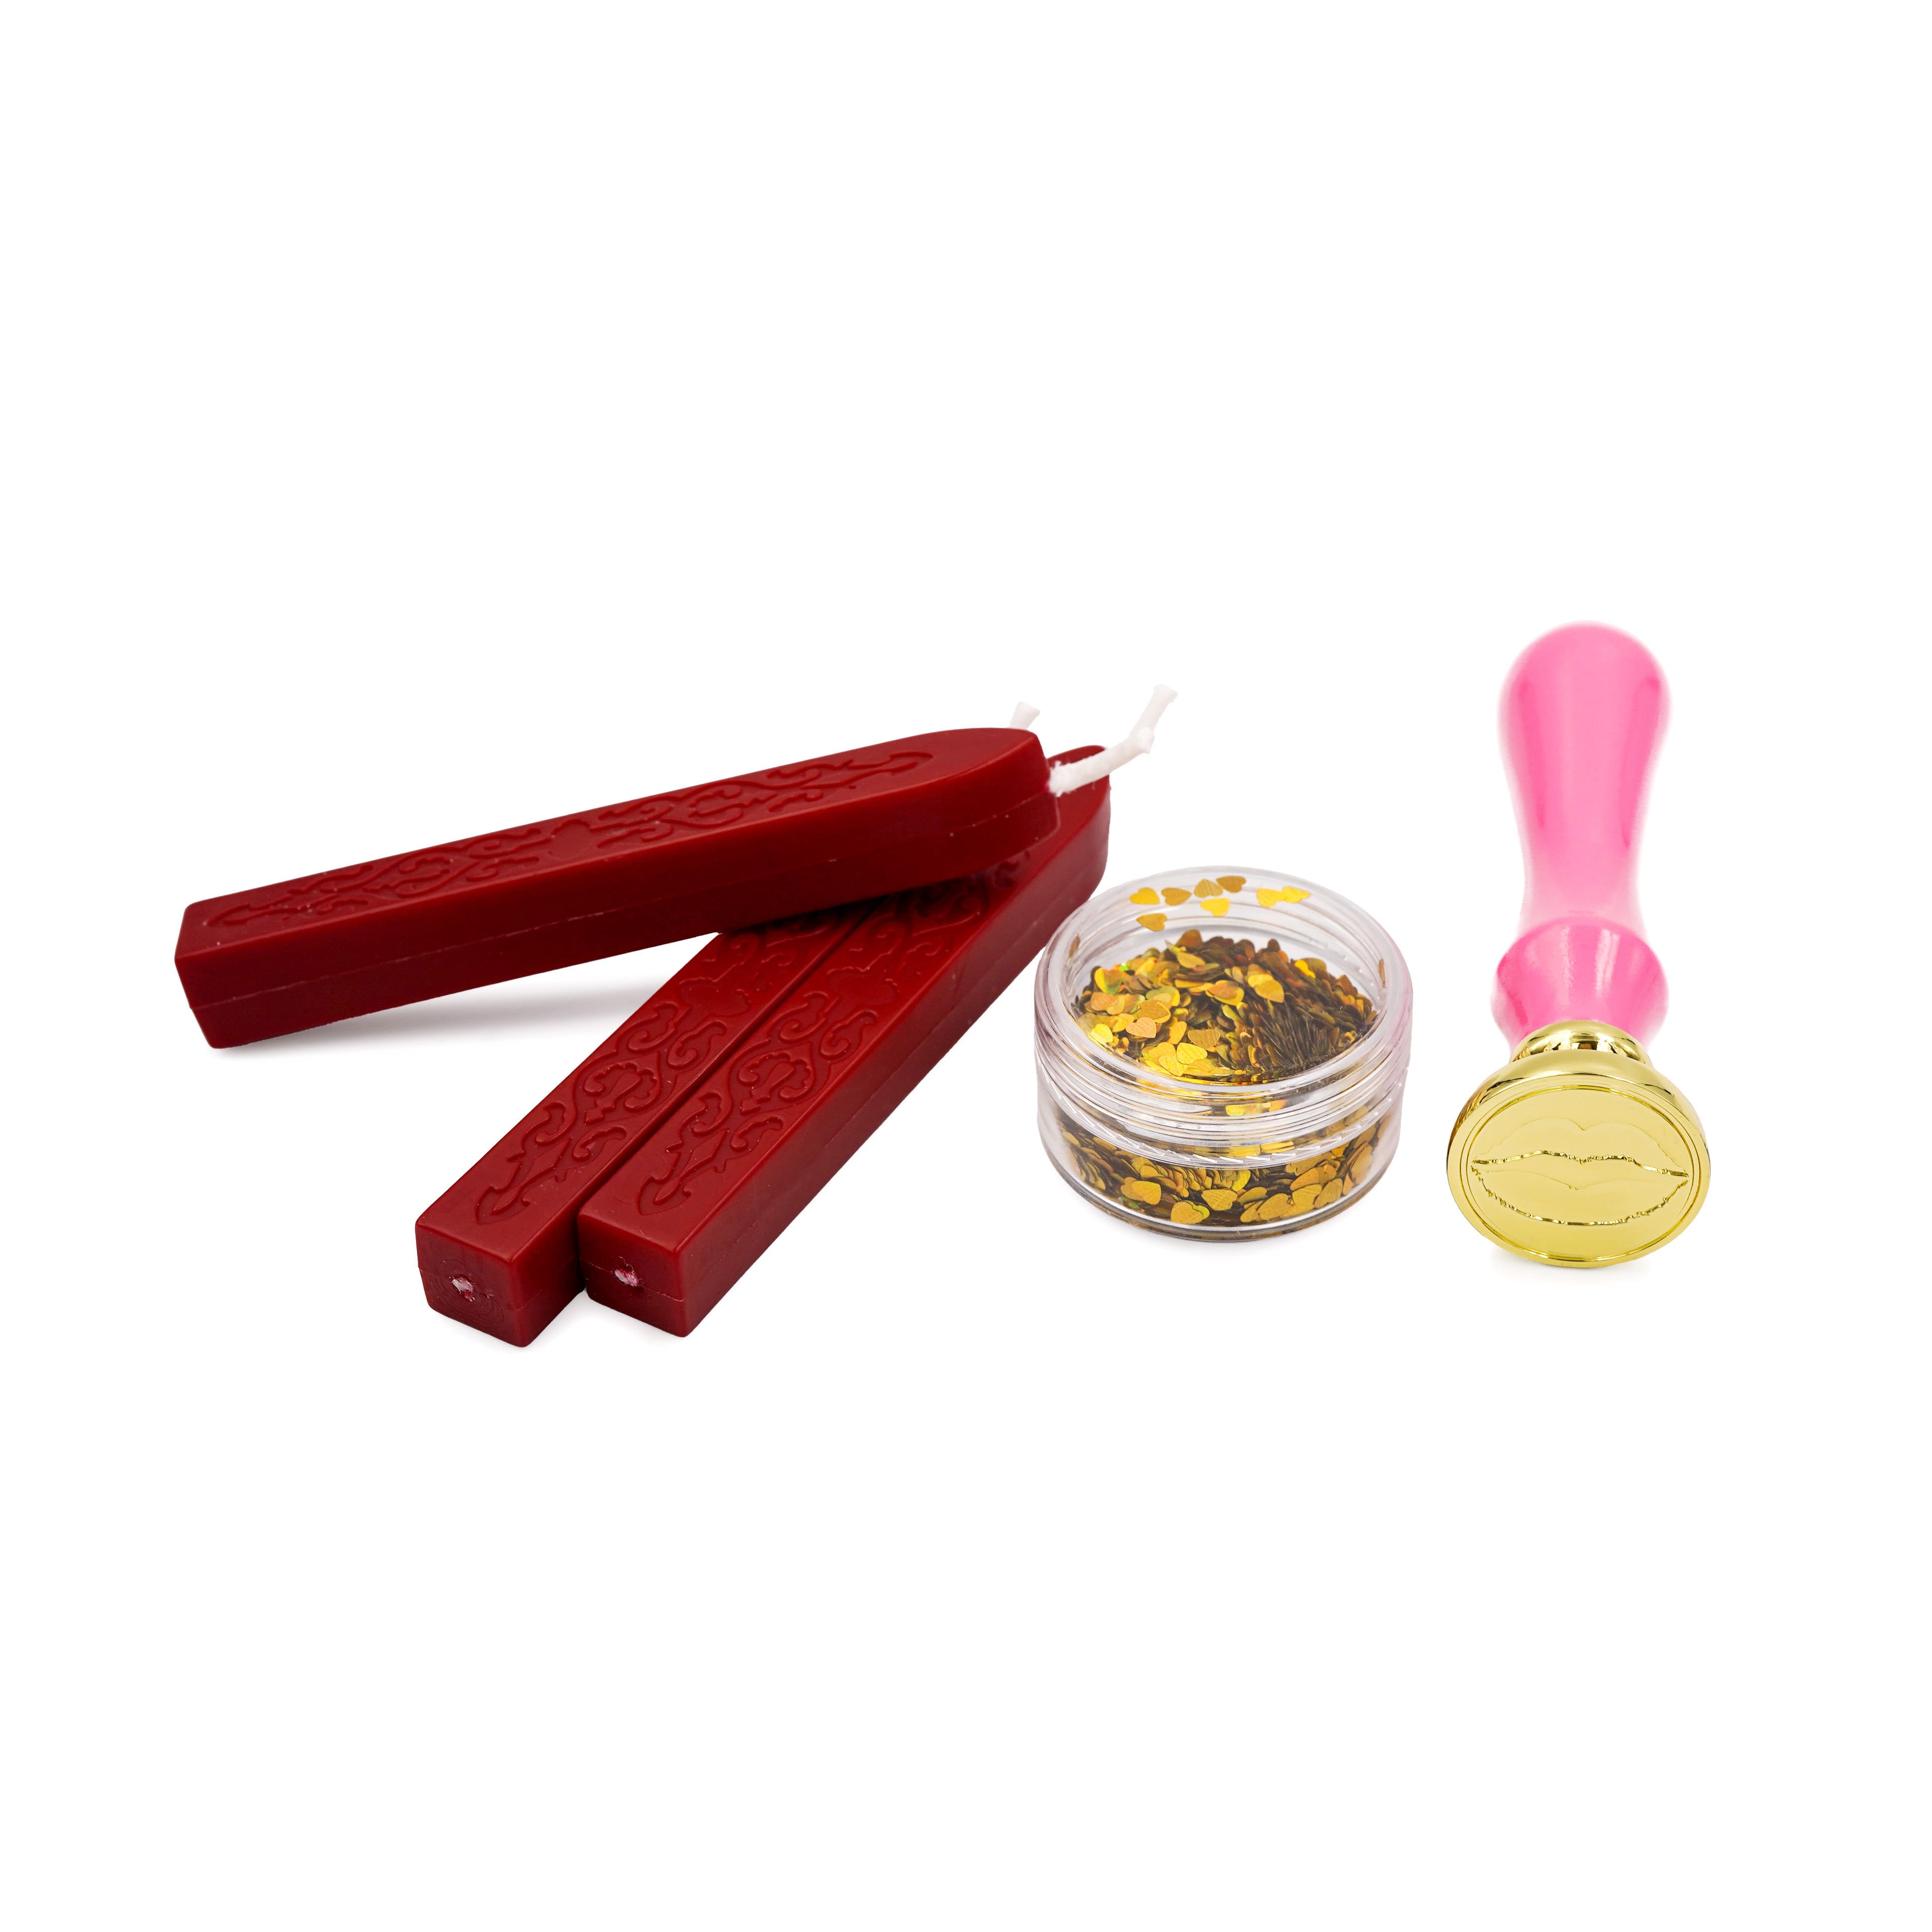 Monogram Sealing Wax Stamp Set by Recollections™